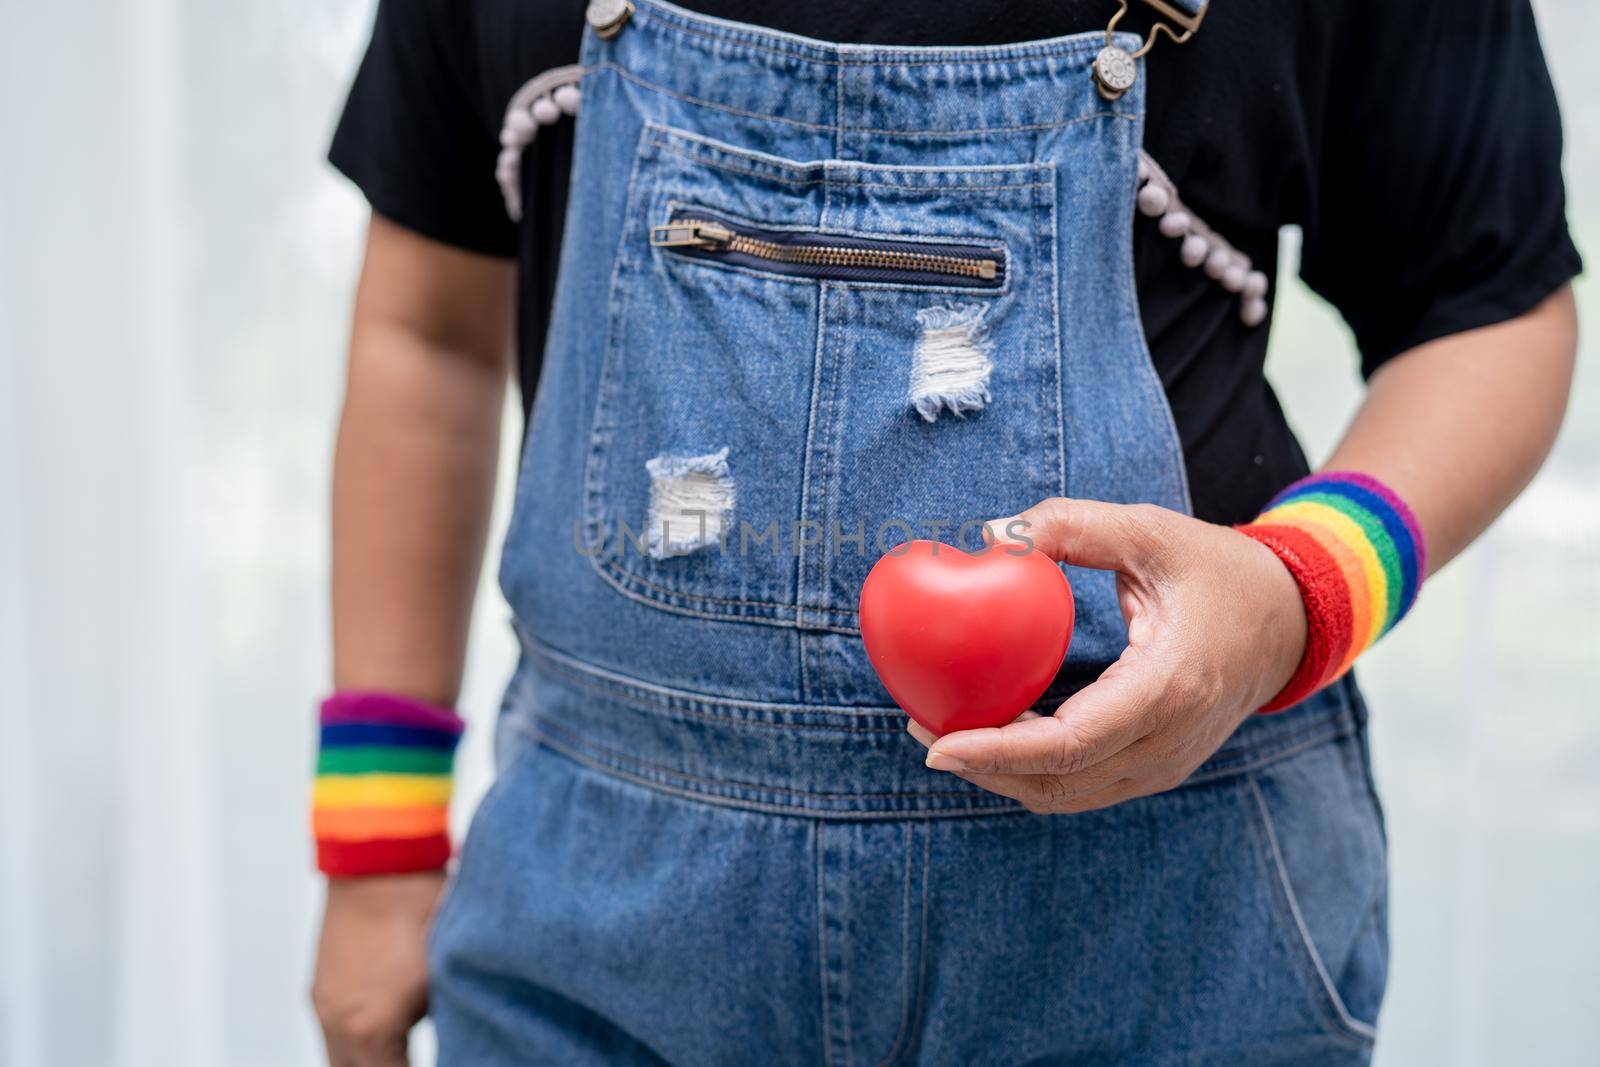 Asian lady wearing rainbow flag wristbands and hold red heart, symbol of LGBT pride month celebrate annual in June social of gay, lesbian, bisexual, transgender, human rights.